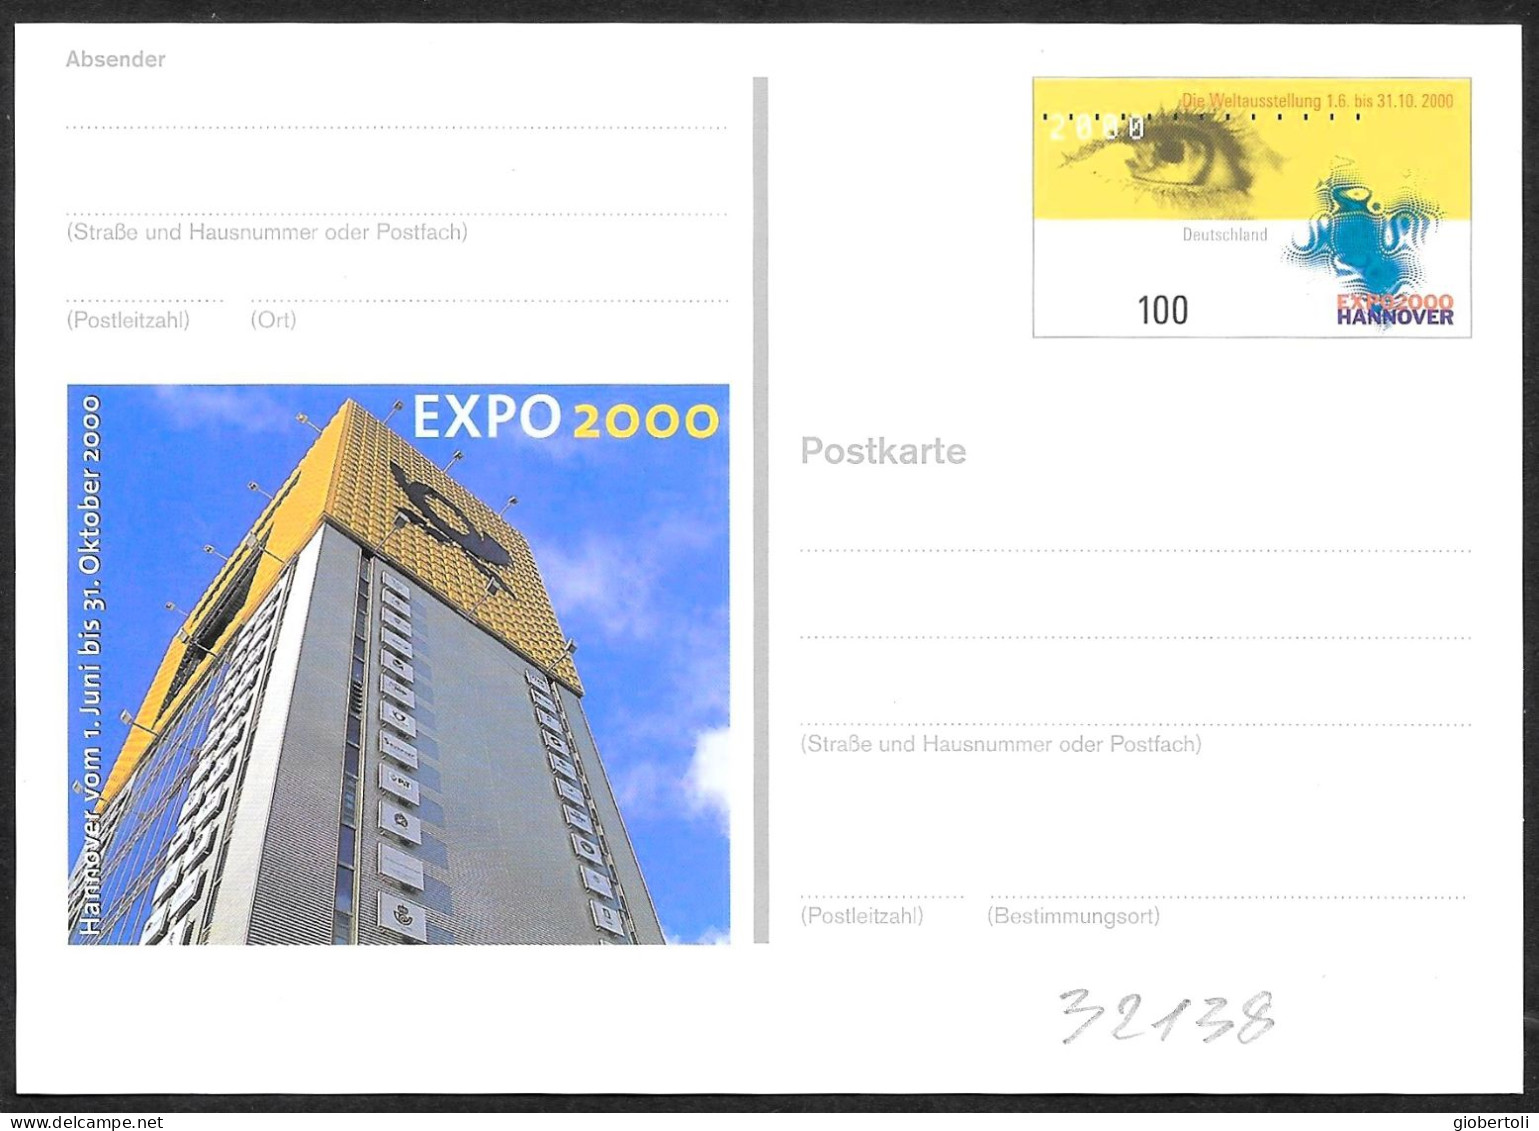 Germania/Germany/Allemagne: Intero, Stationery, Entier, "EXPO 2000" - 2000 – Hanover (Germany)